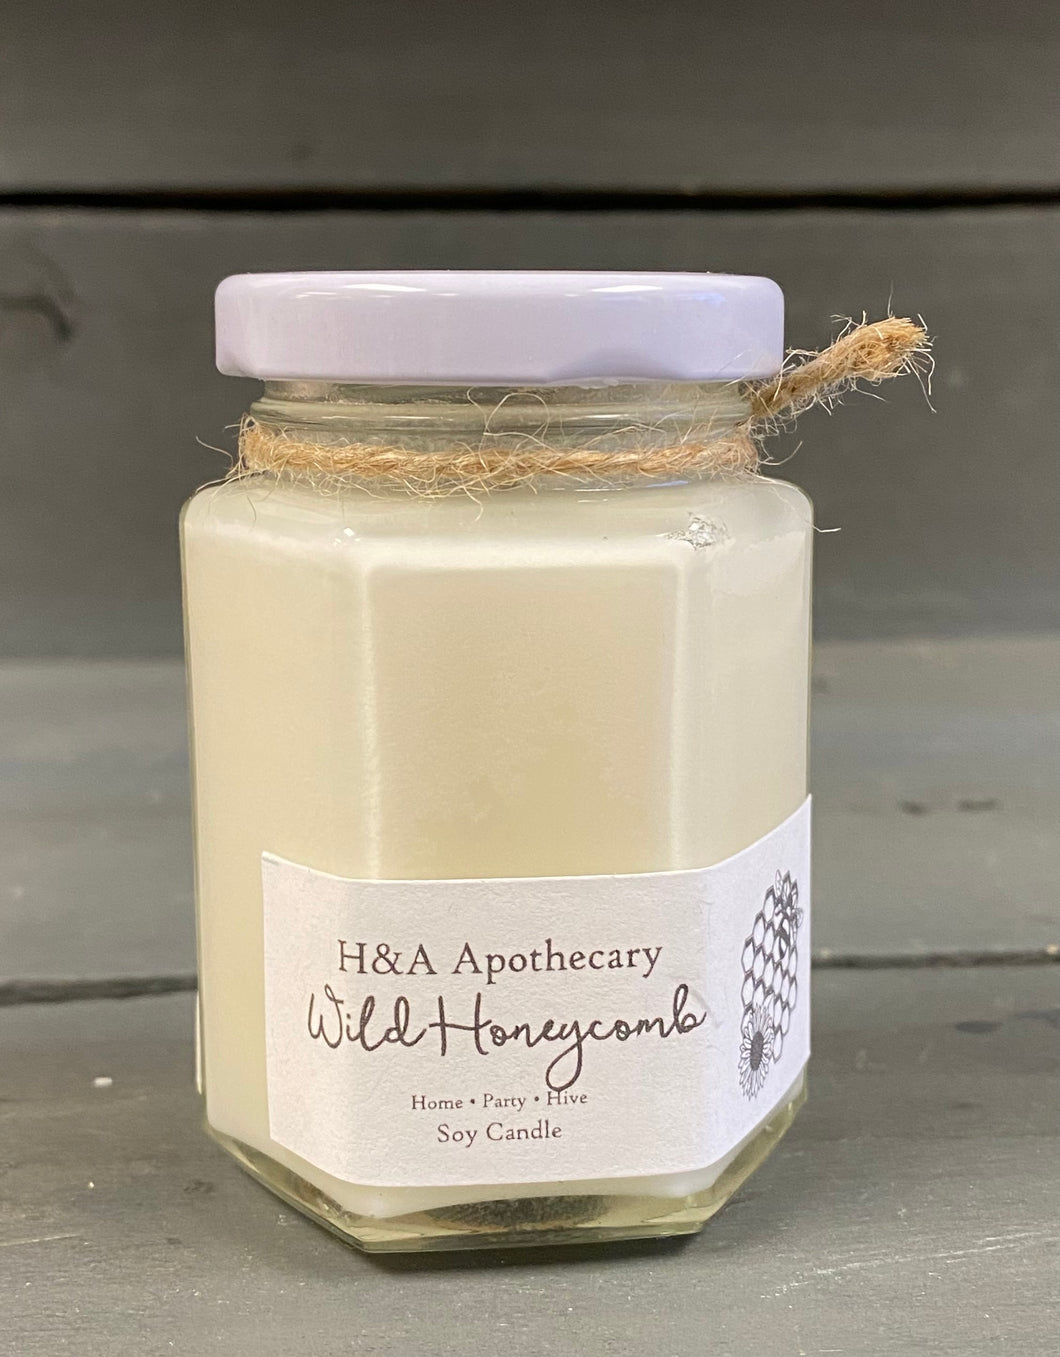 H&A Apothecary Wild Honeycomb Soy Candle